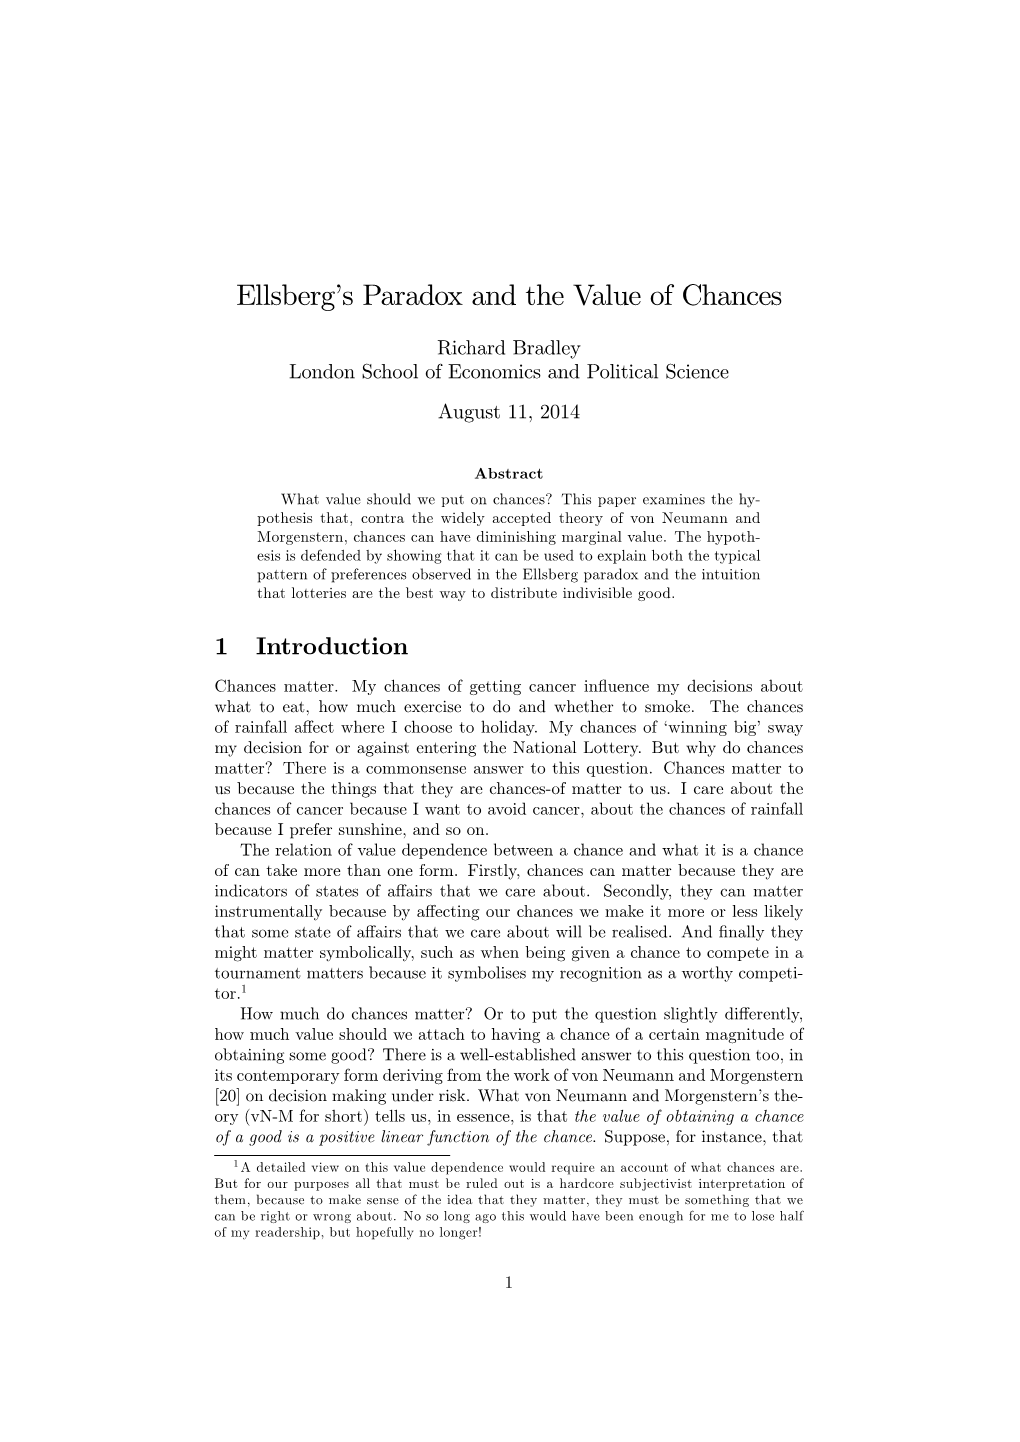 Ellsberg's Paradox and the Value of Chances